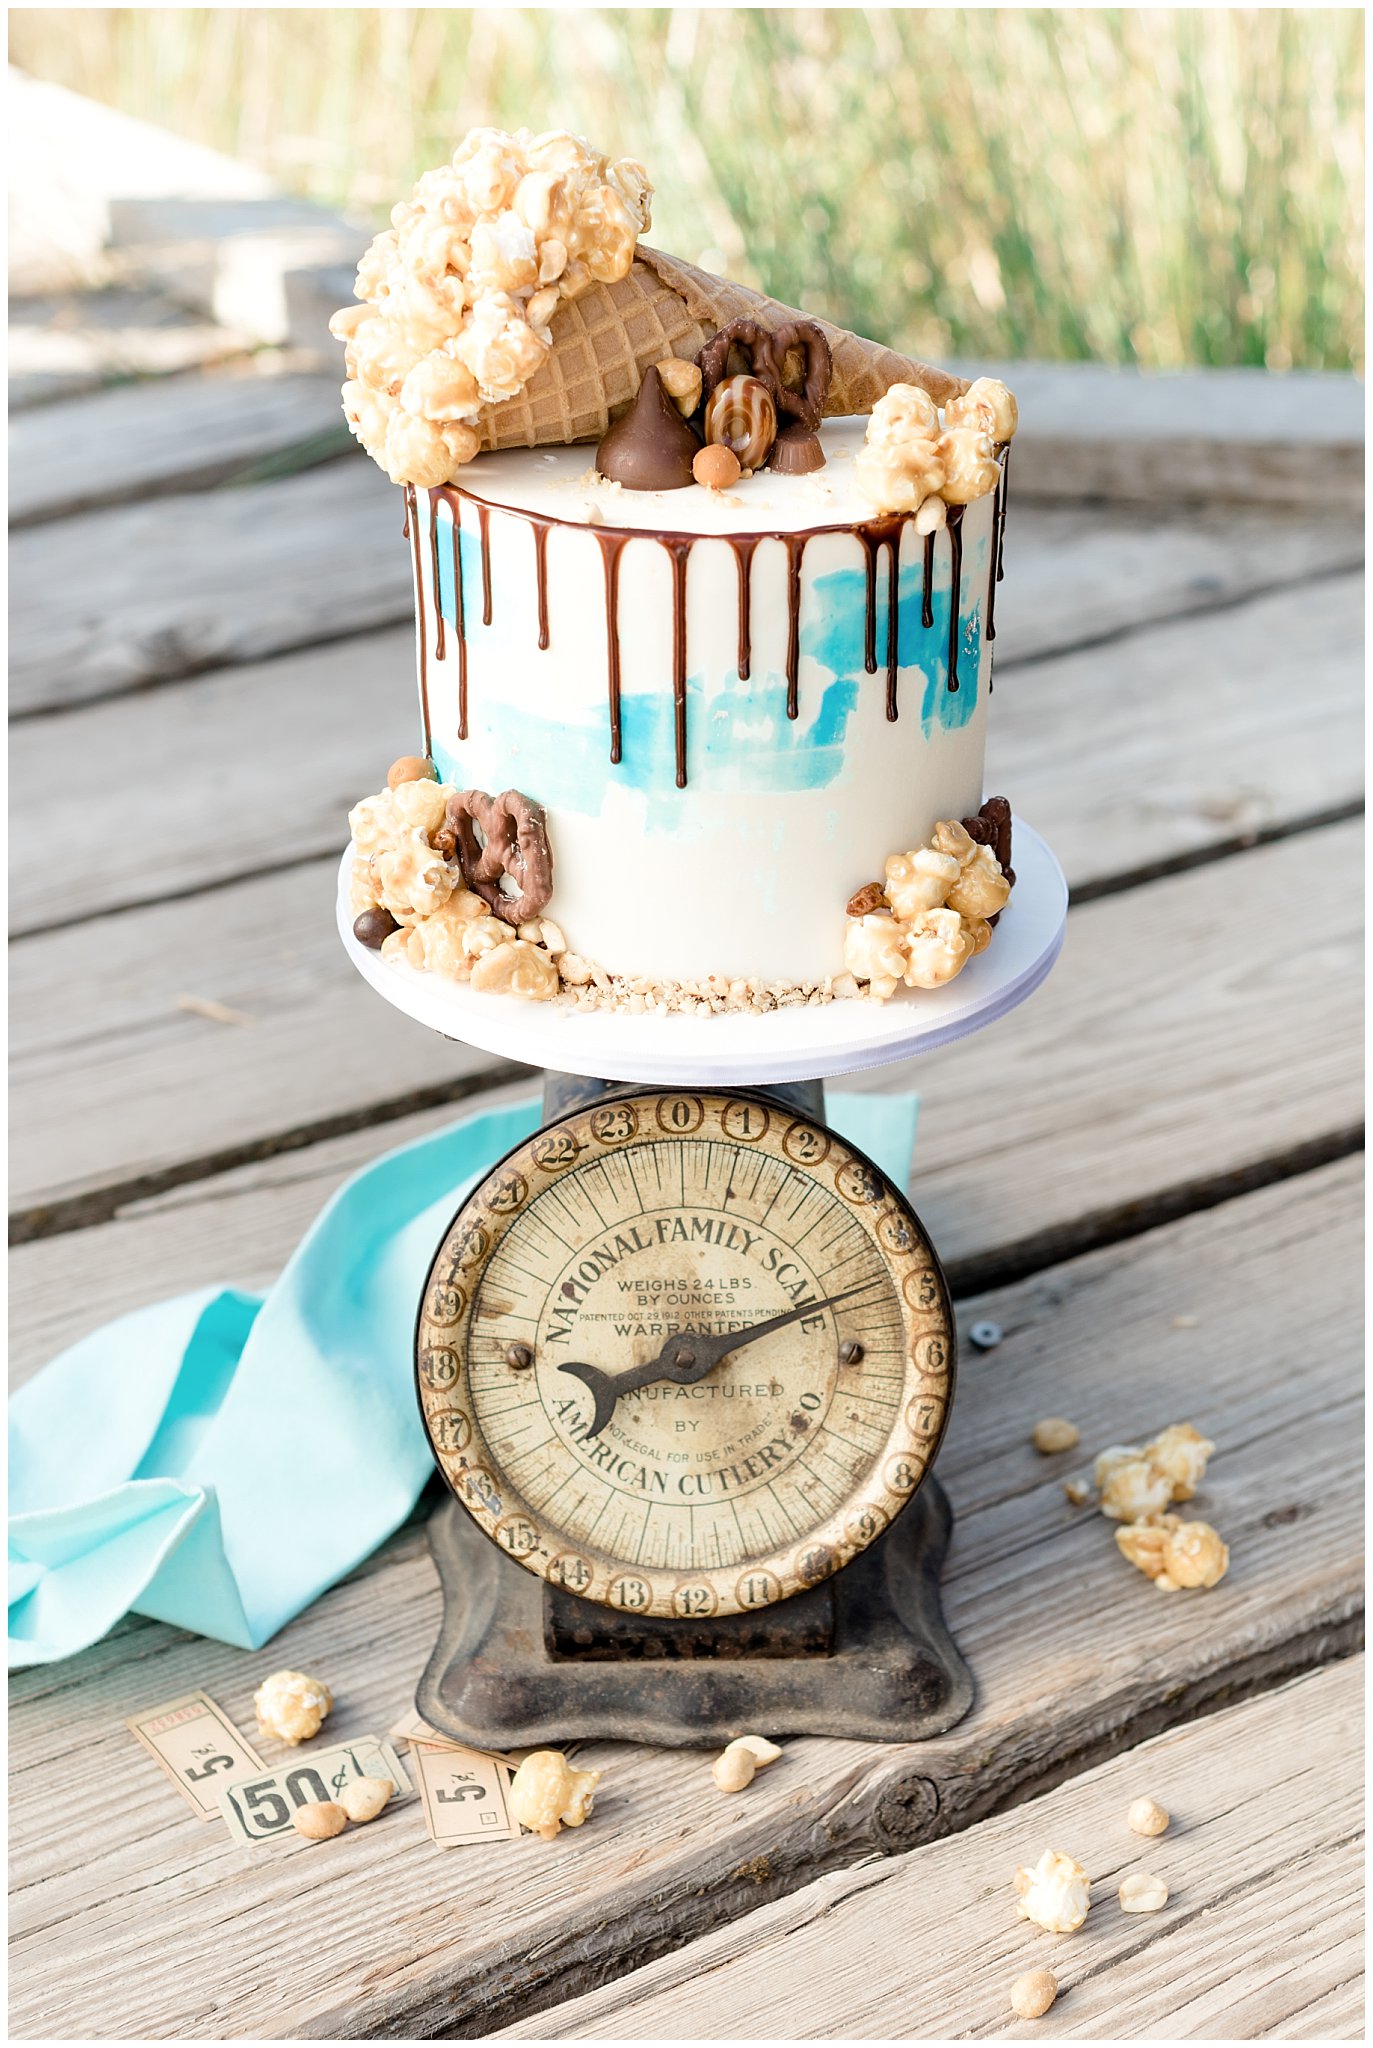 Caramel popcorn, hershey kisses and toffee wedding cake on a vintage scale at the boardwalk in Utah | Jessie and Dallin Photography | Utah Wedding Photographers